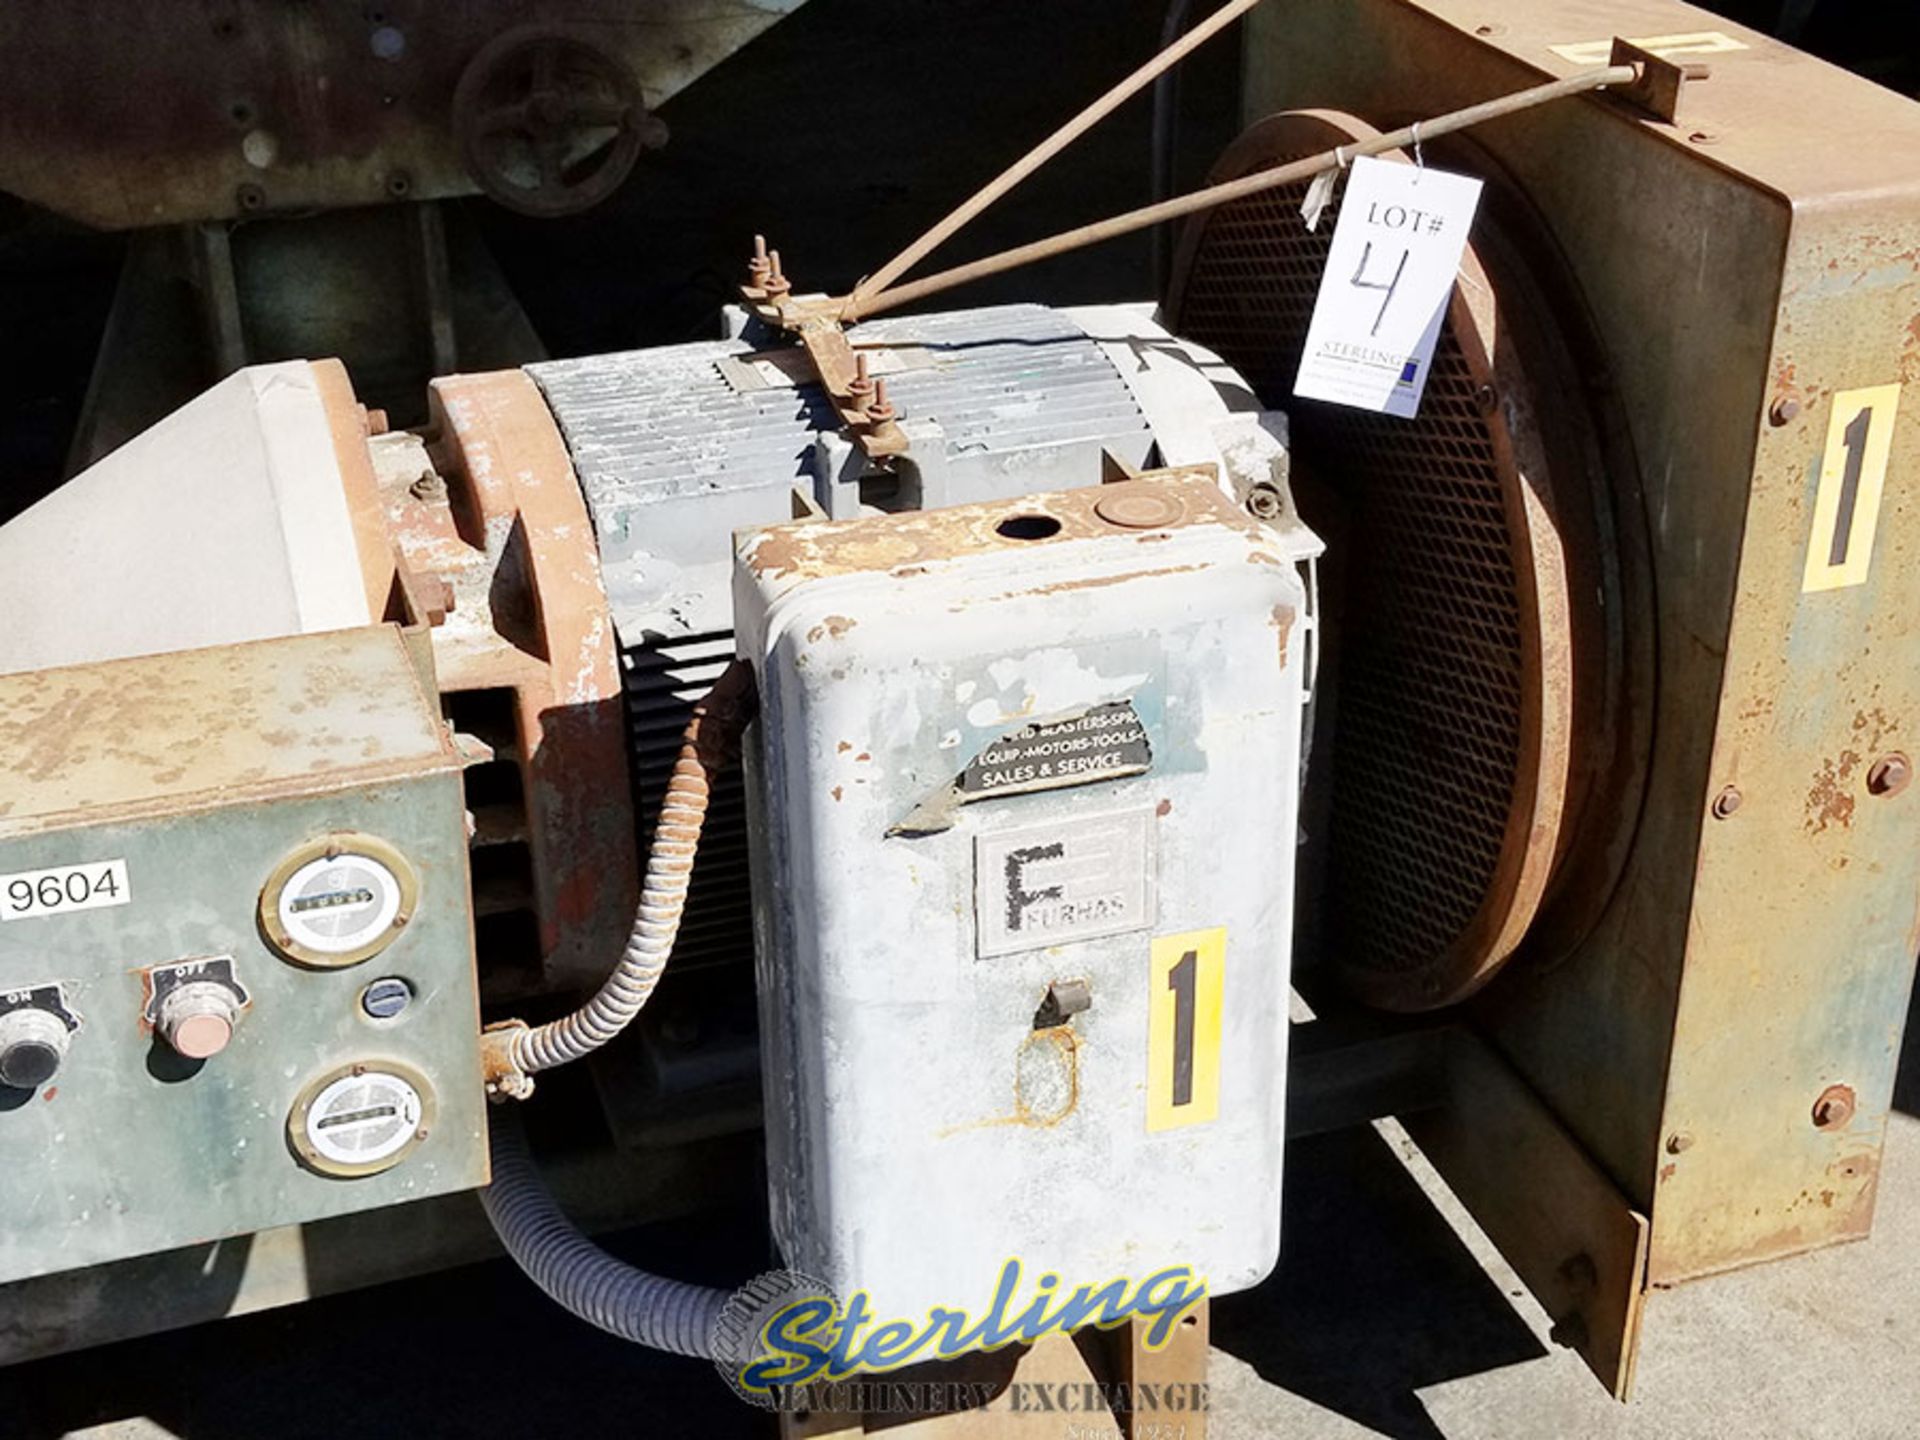 210 CFM Used Hydrovane Rotaryvane Air Compressor, Mdl. 170 CK, Fan Type Oil - Image 3 of 8